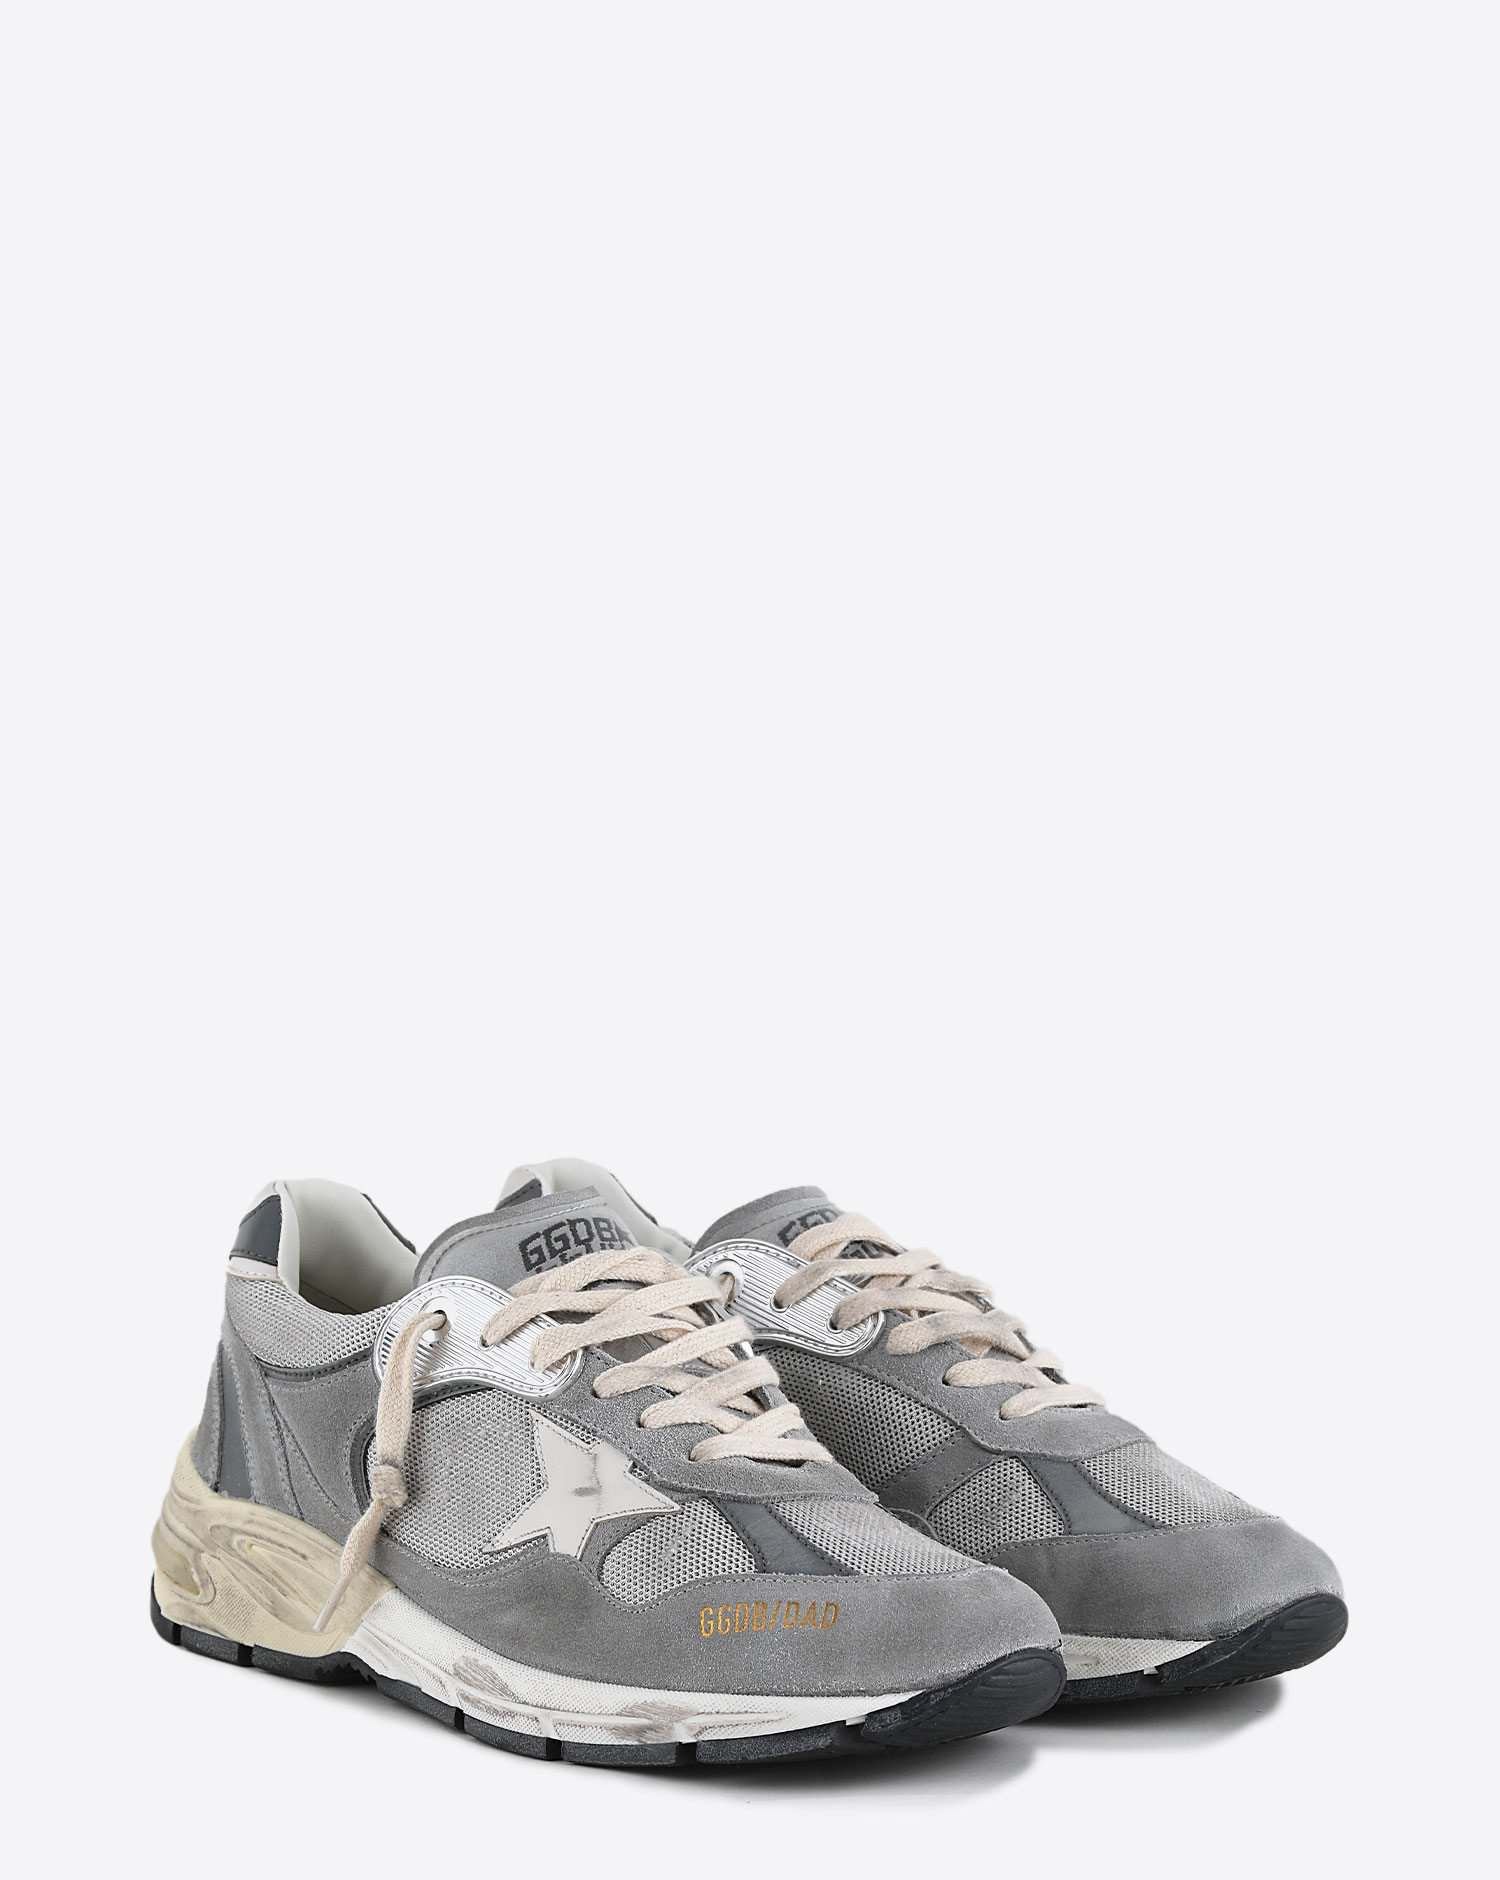 Sneakers Running Dad grise étoile blanche 60379 Golden Goose femme. Face.